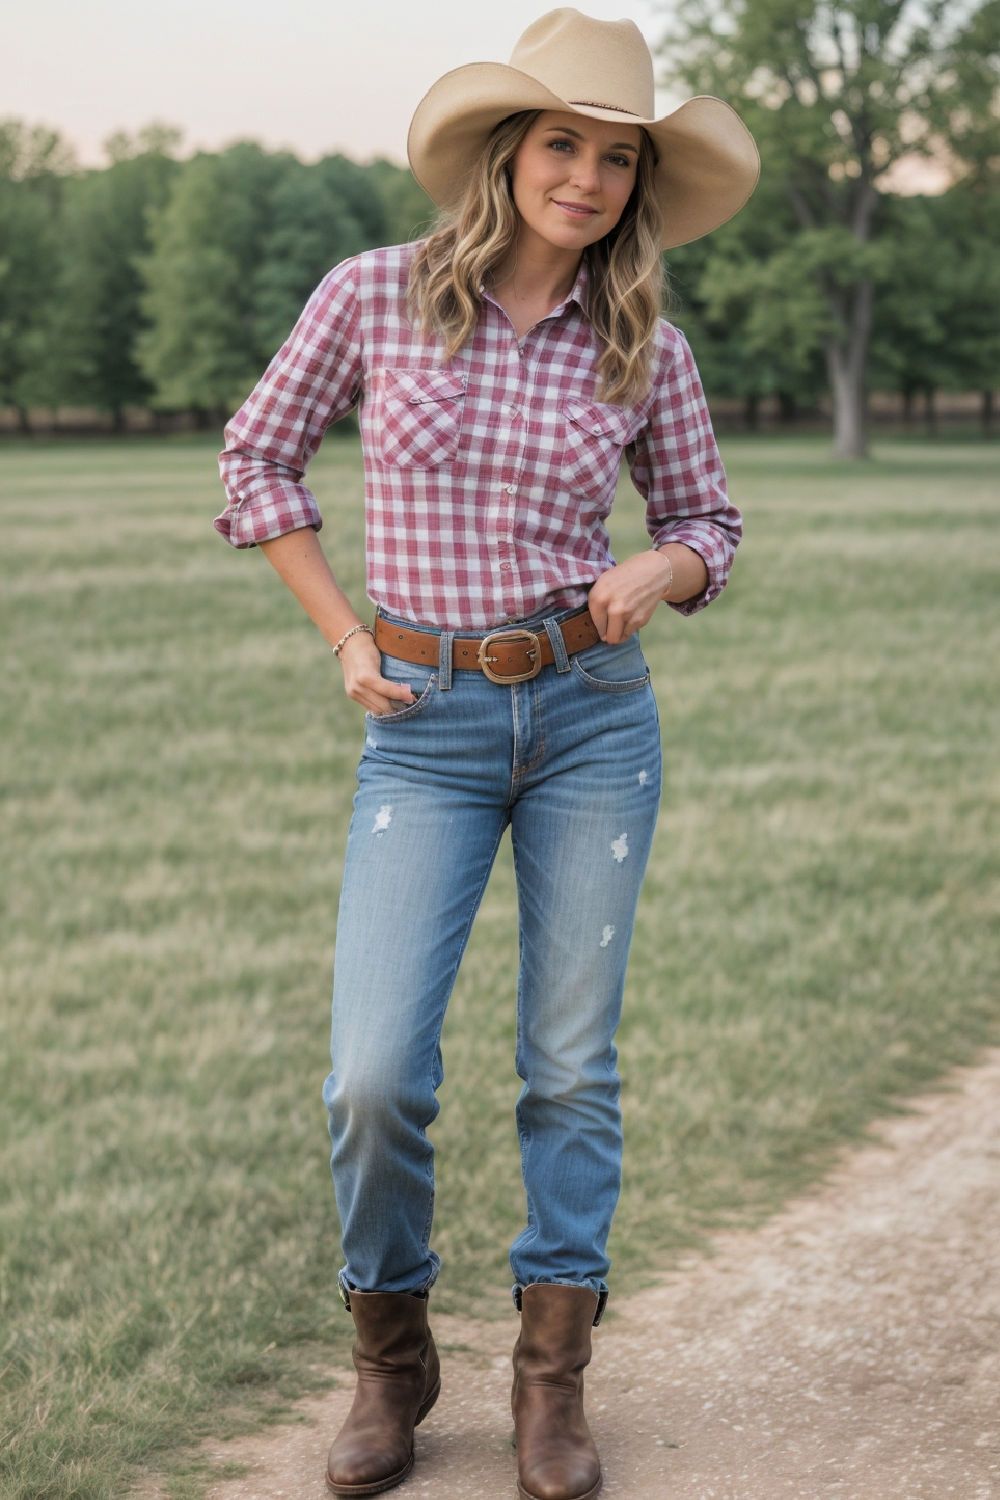 classic country charm to wear